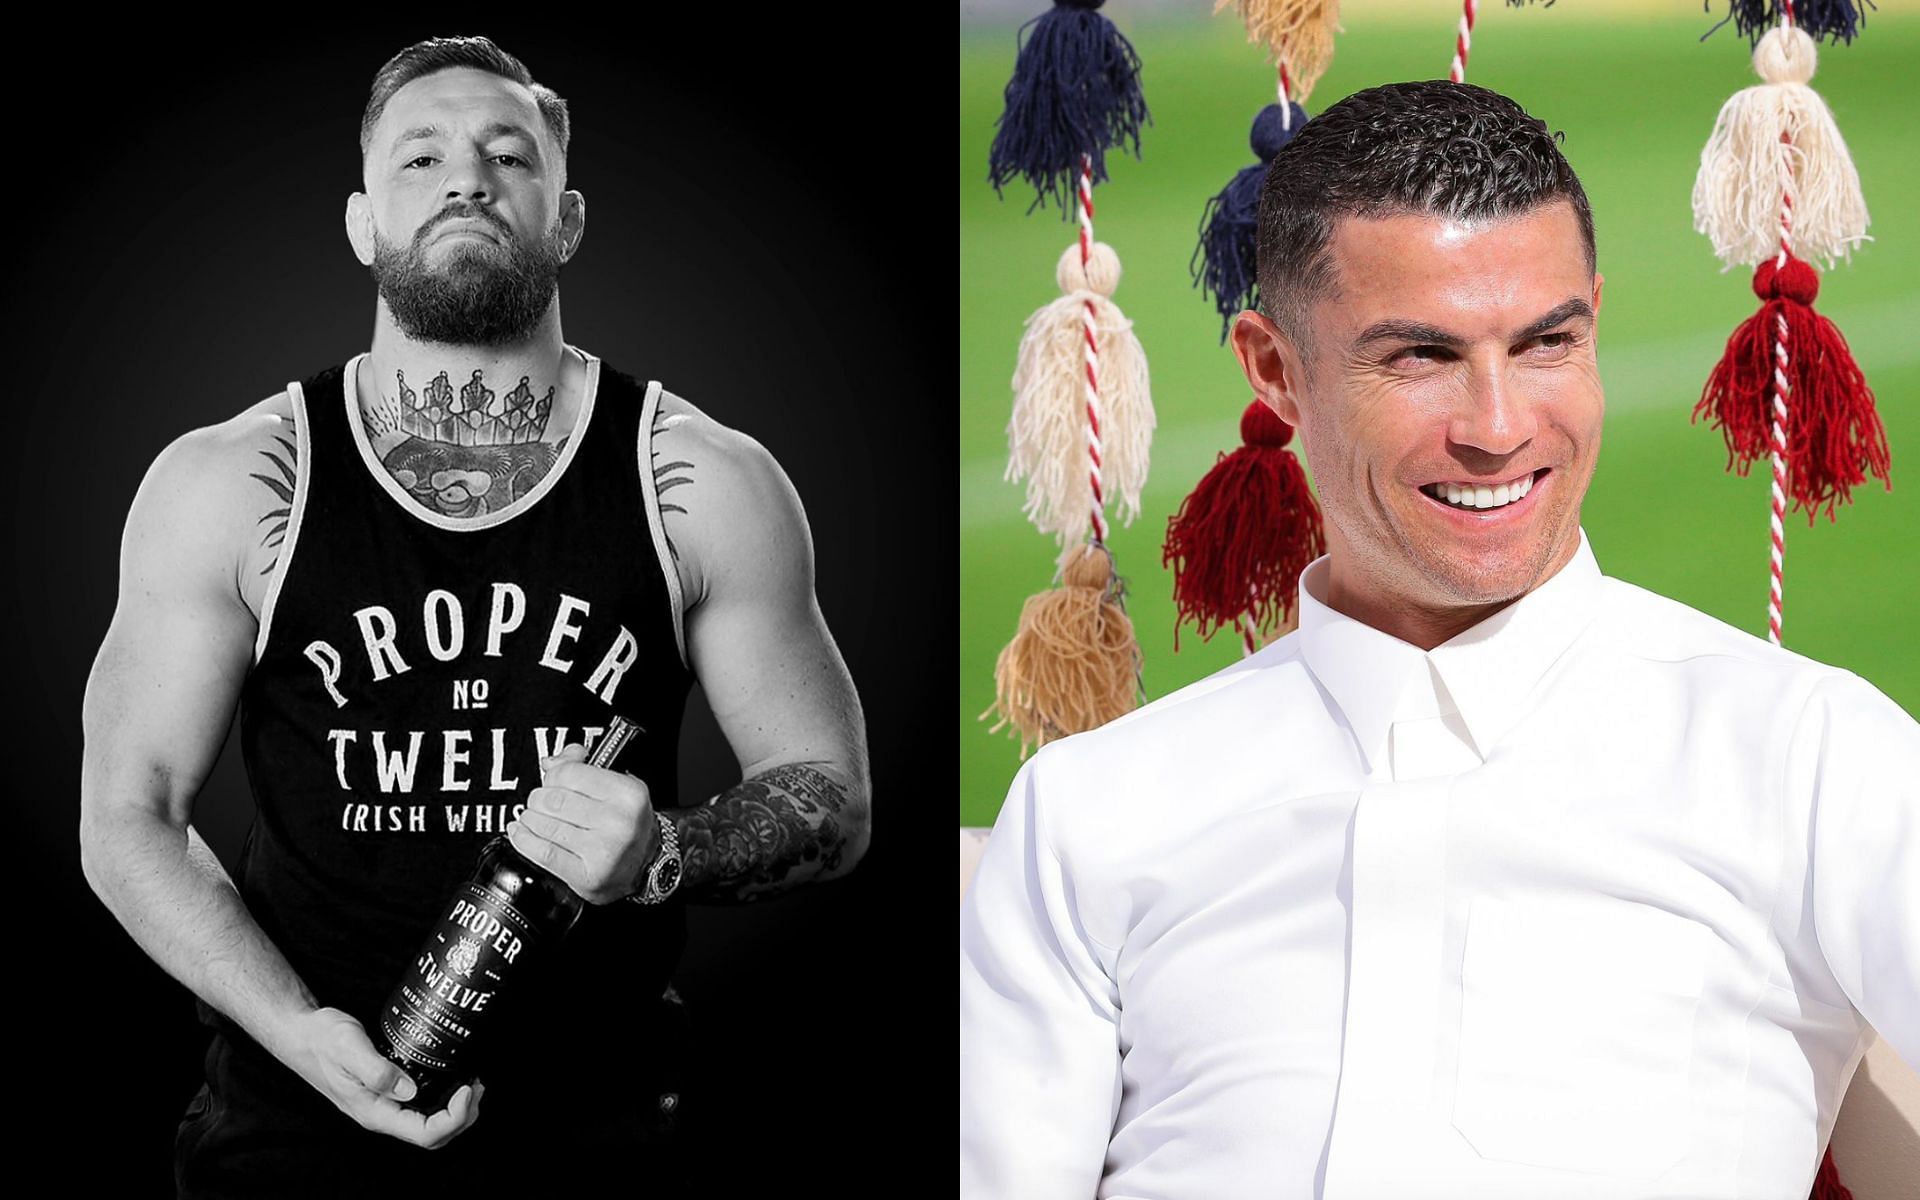 Conor McGregor (left) reflects on an old conversation with Cristiano Ronaldo (right) [Photo Courtesy @thenotoriousmma and @cristiano on Instagram]